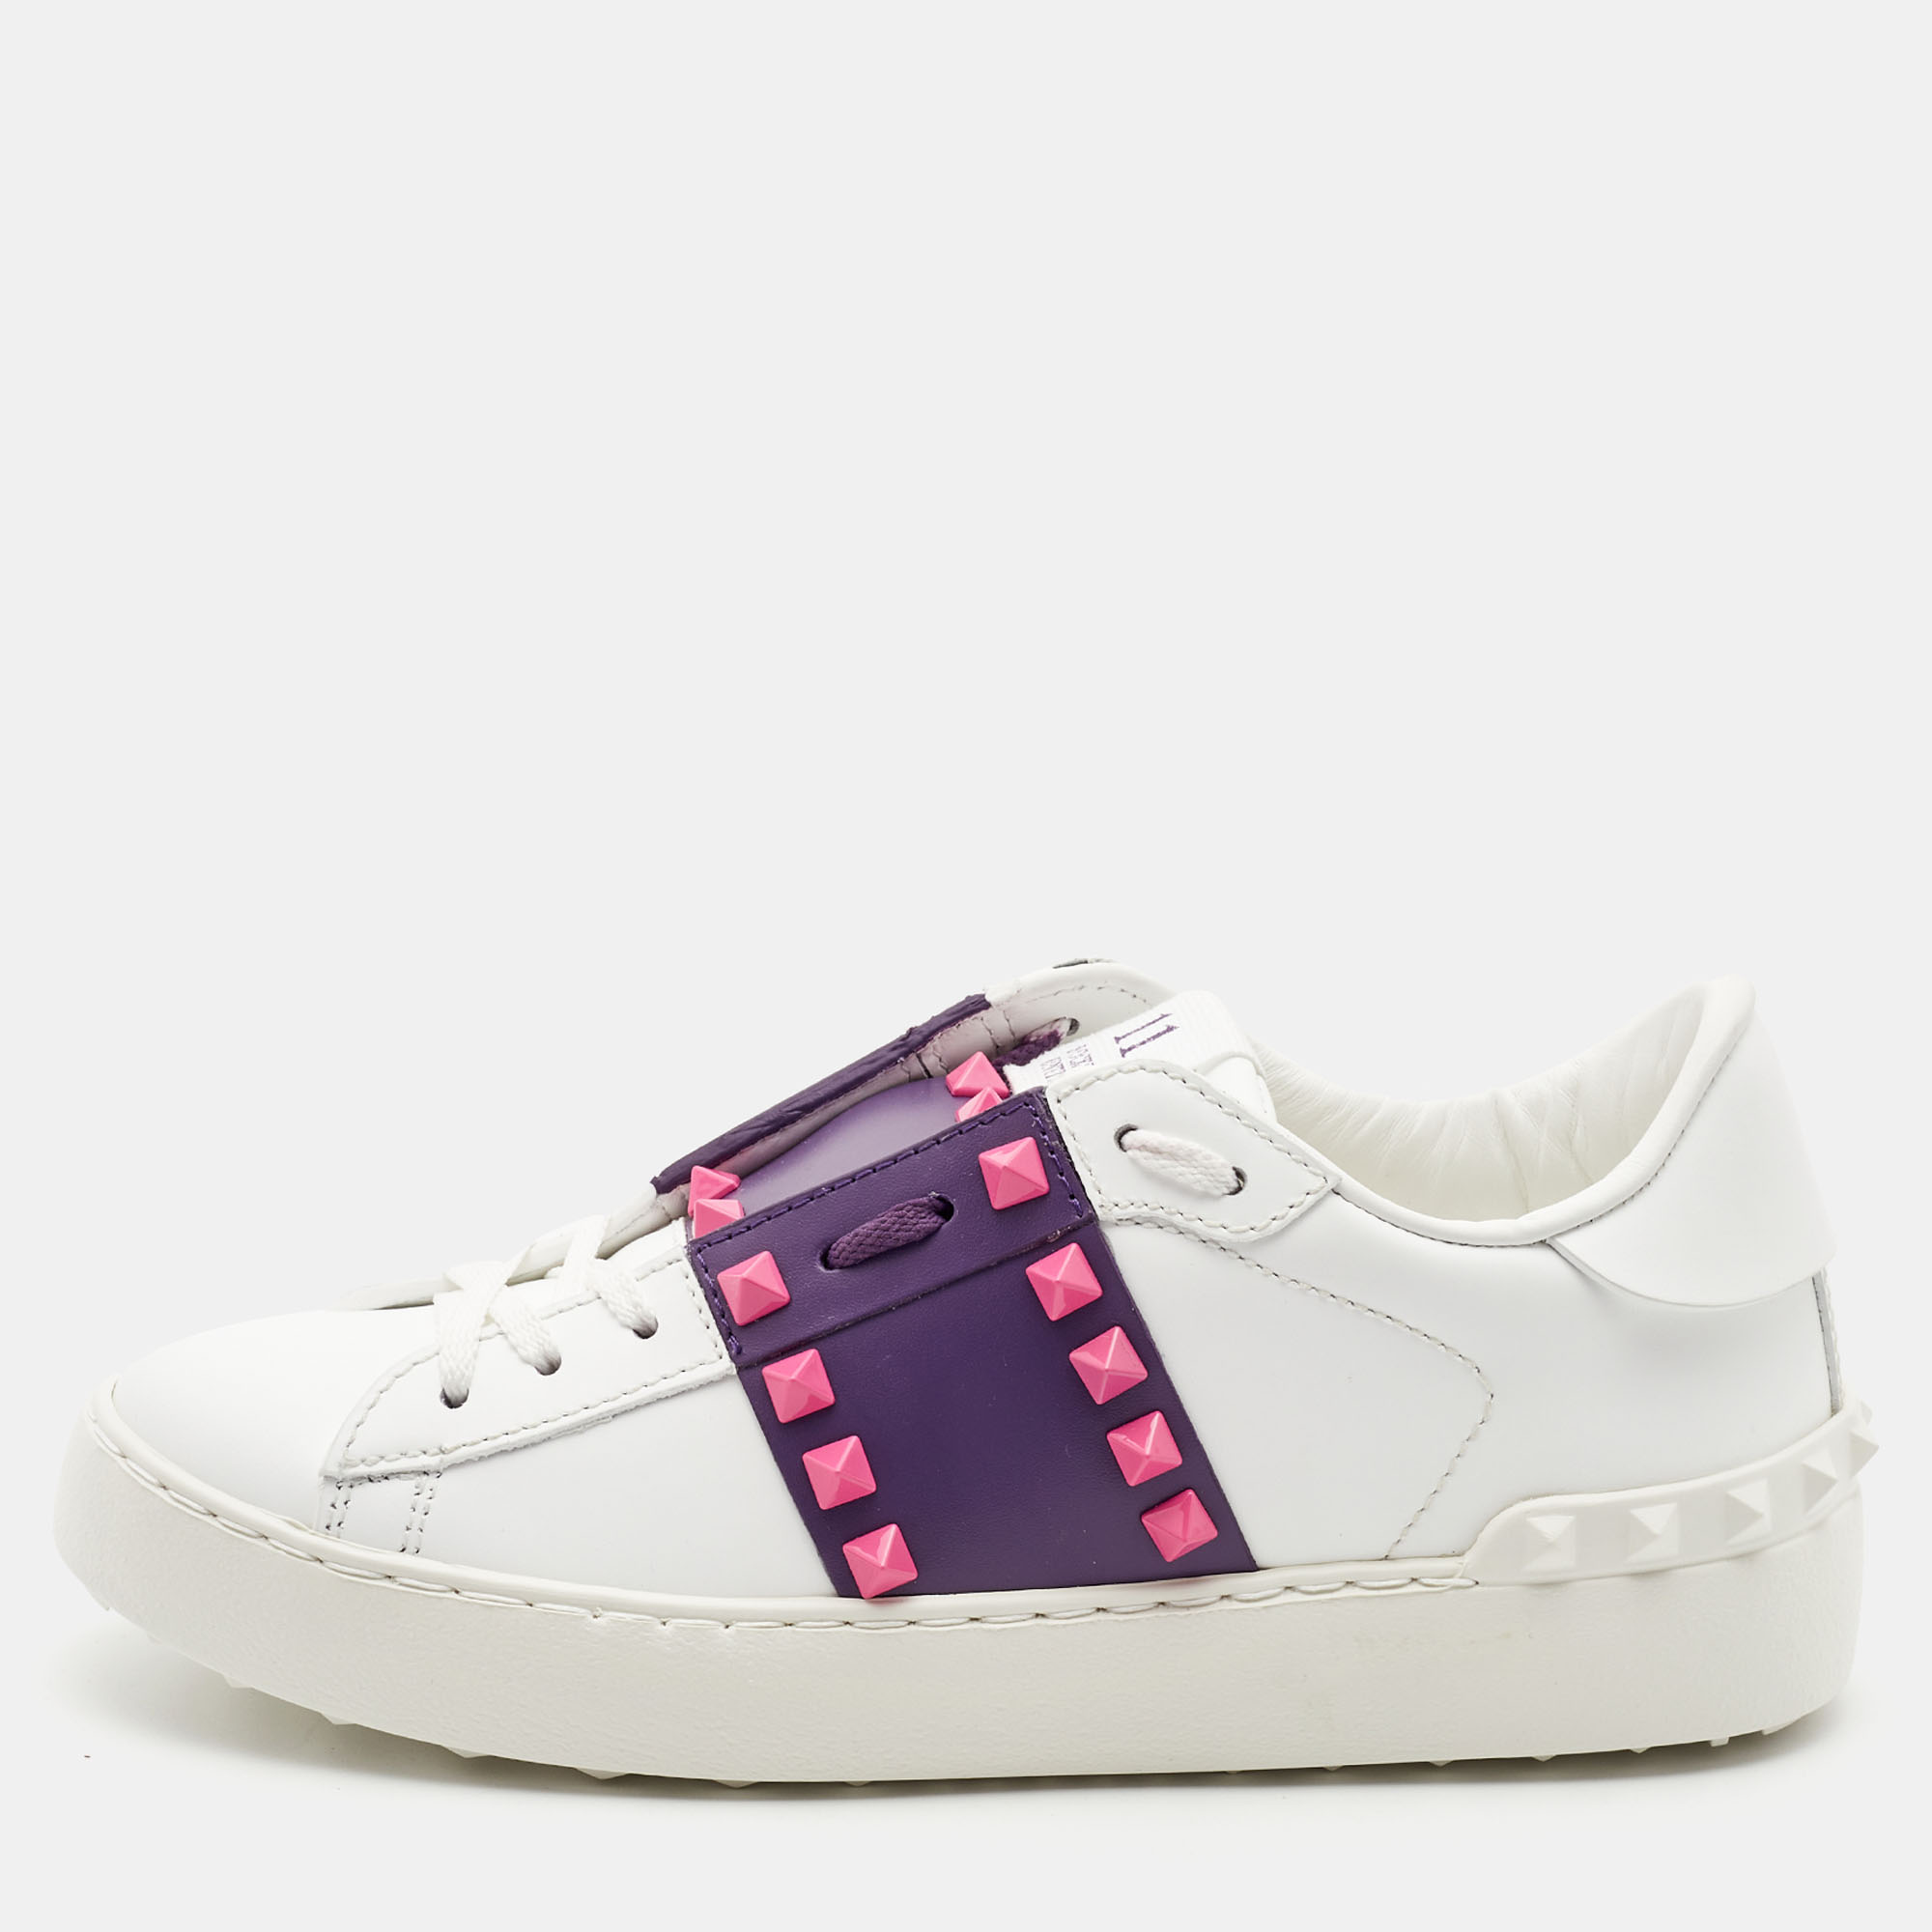 Valentino White/Purple Leather Rockstud Low Top Sneakers Size 35.5